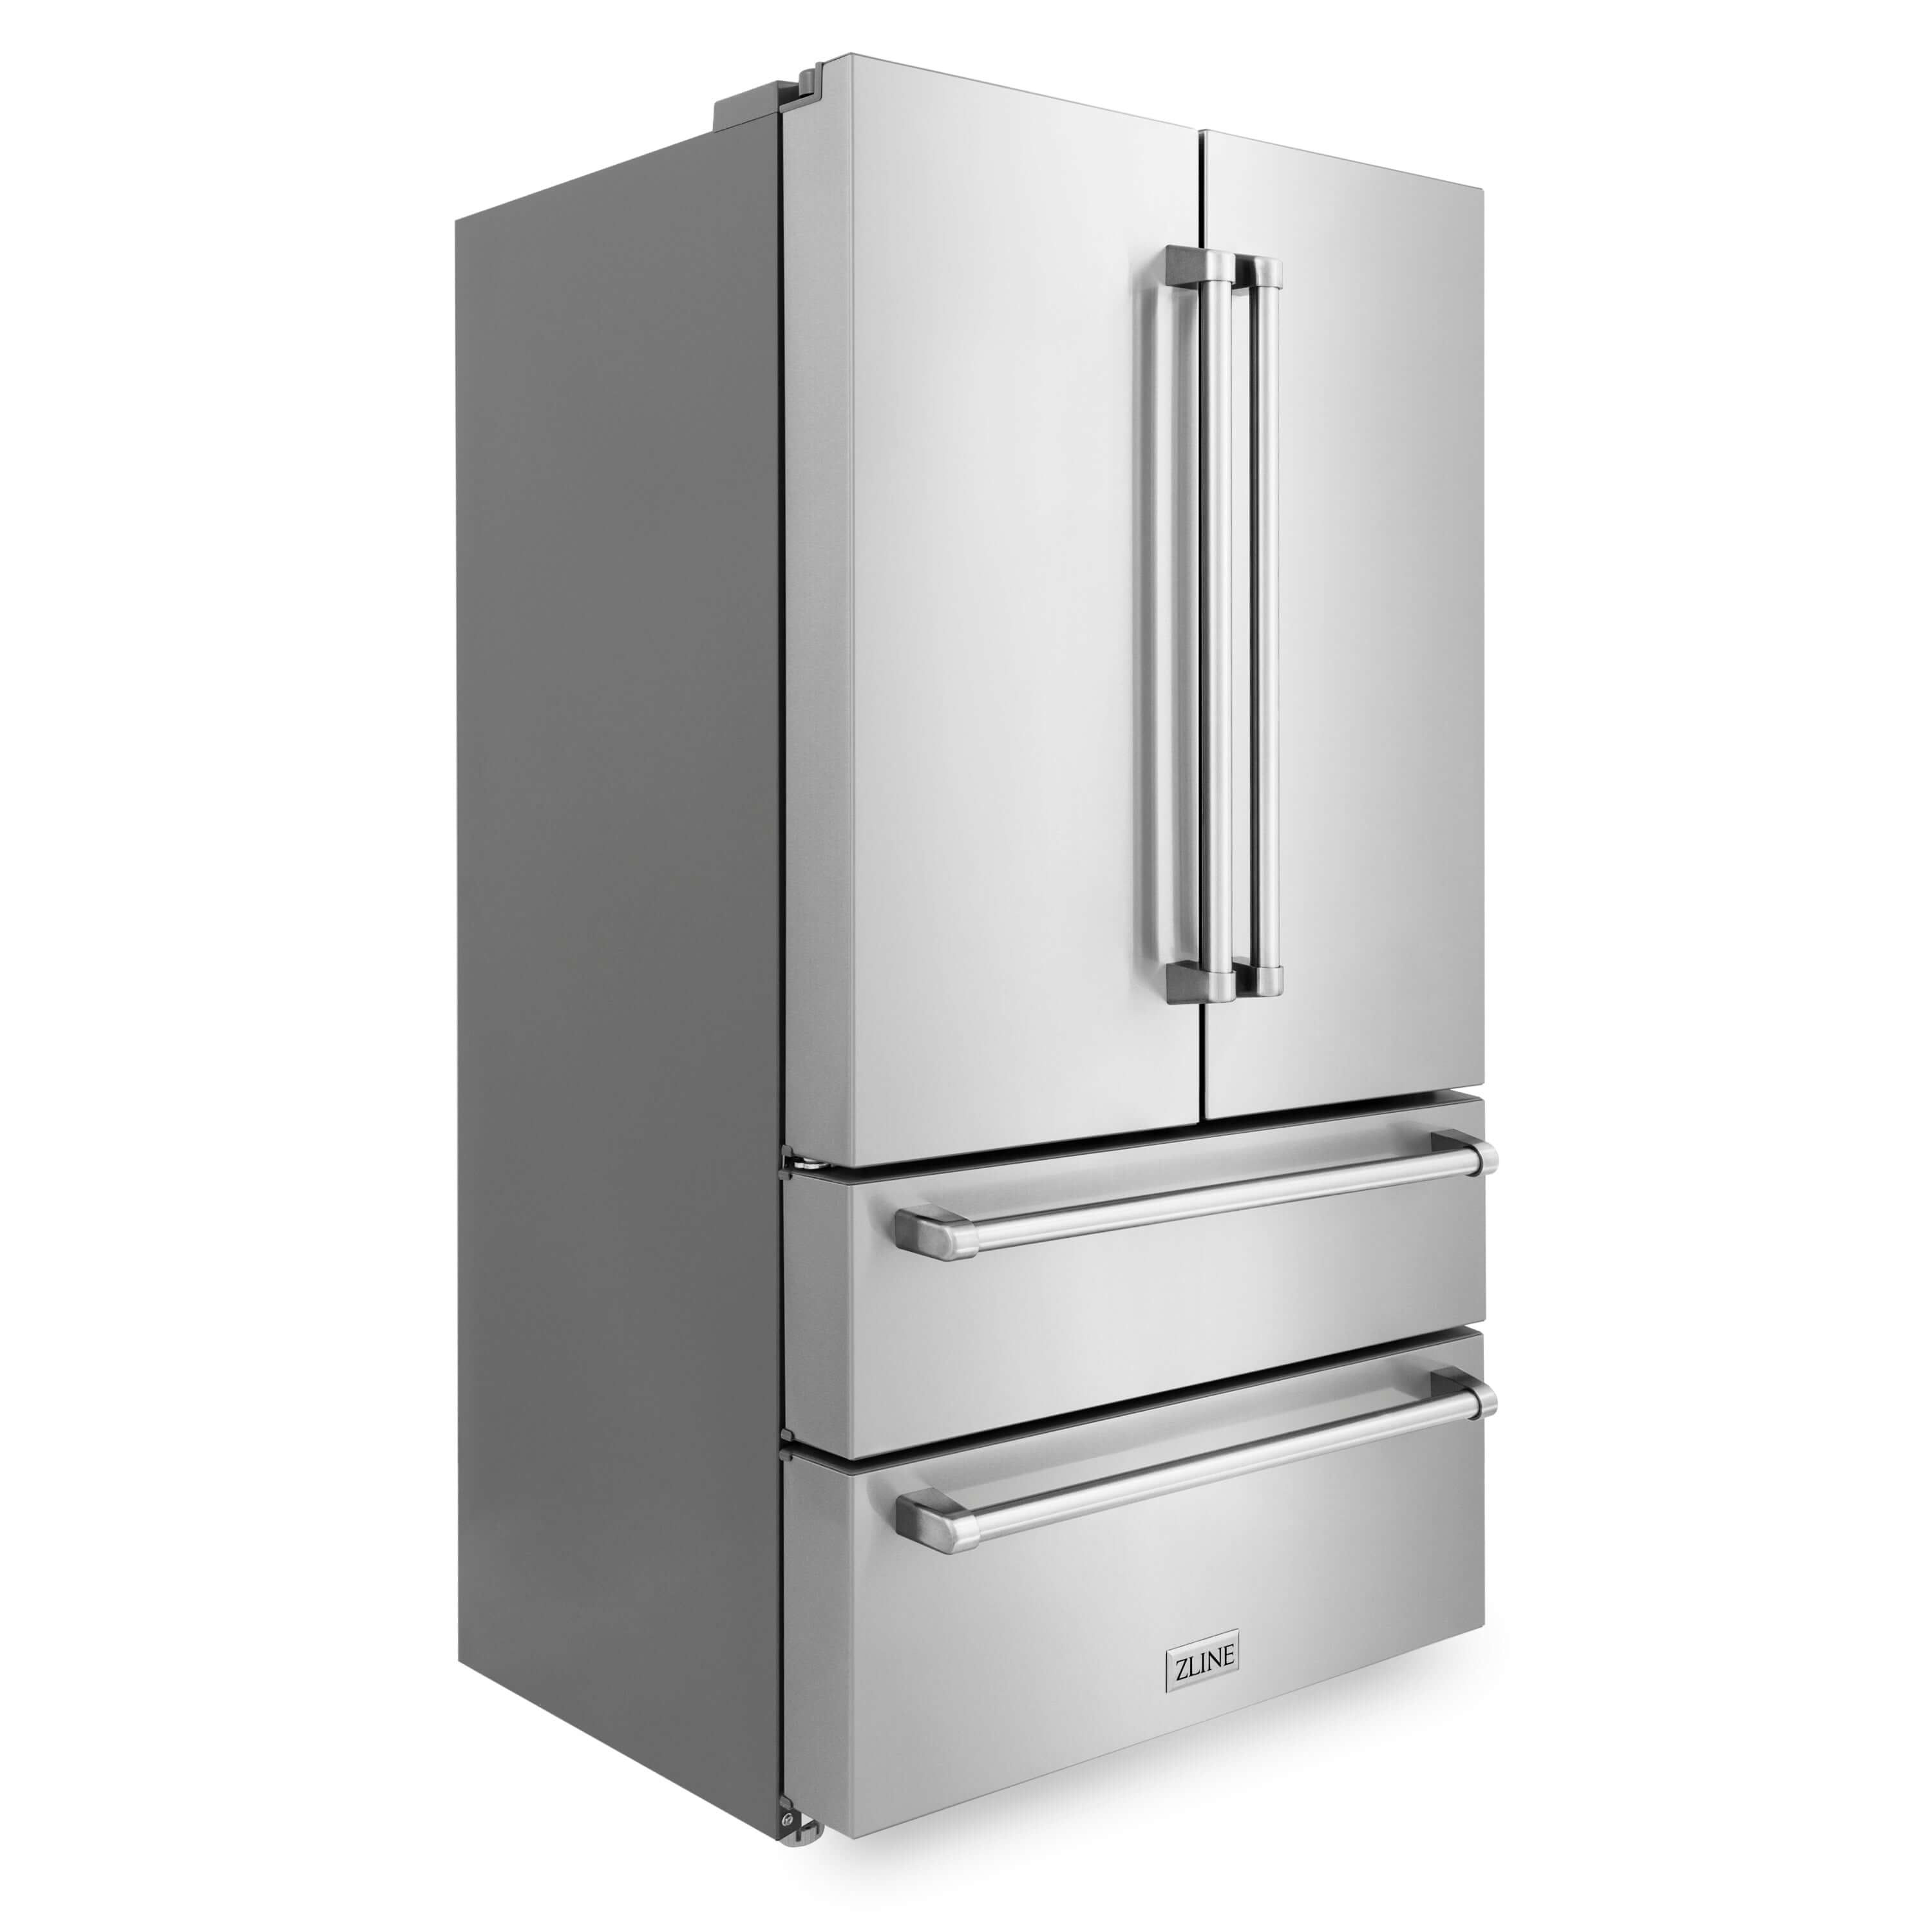 ZLINE Kitchen Package in Stainless Steel with 36 in. French Door Refrigerator, 48 in. Dual Fuel Range, 48 in. Convertible Vent Range Hood, 24 in. Microwave Drawer, and 24 in. Tall Tub Dishwasher (5KPR-RARH48-MWDWV)